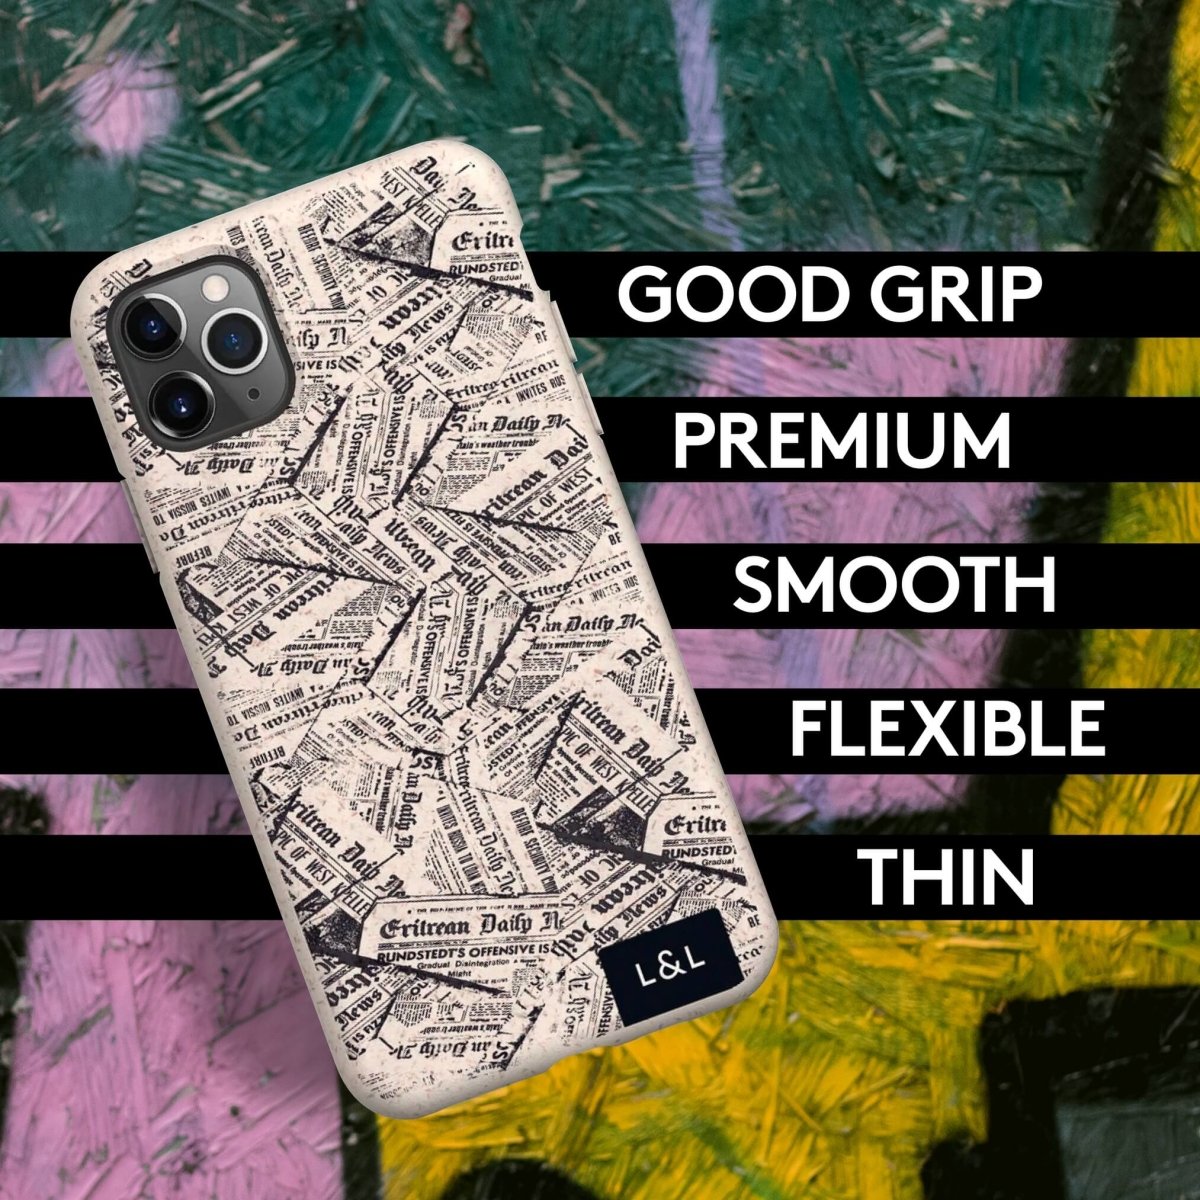 Abstract Earth Eco Phone Case - Loam & Lore